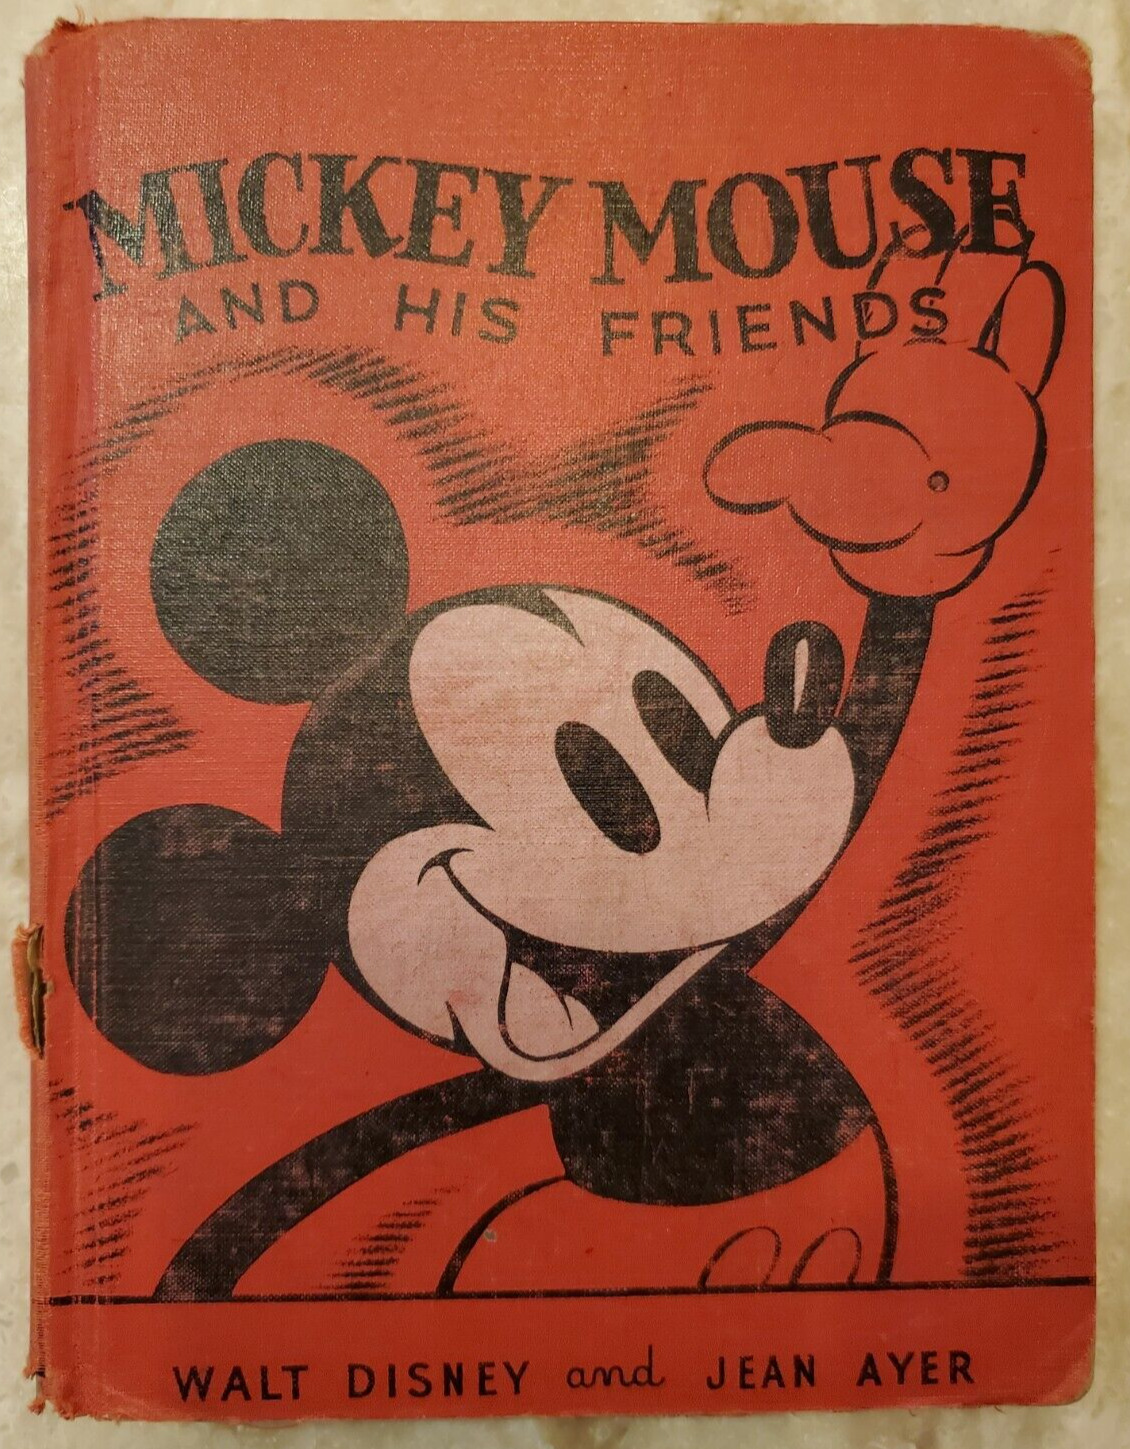 1937 MICKEY MOUSE AND HIS FRIENDS by Walt Disney & Jean Ayer - 1st ed. Vintage